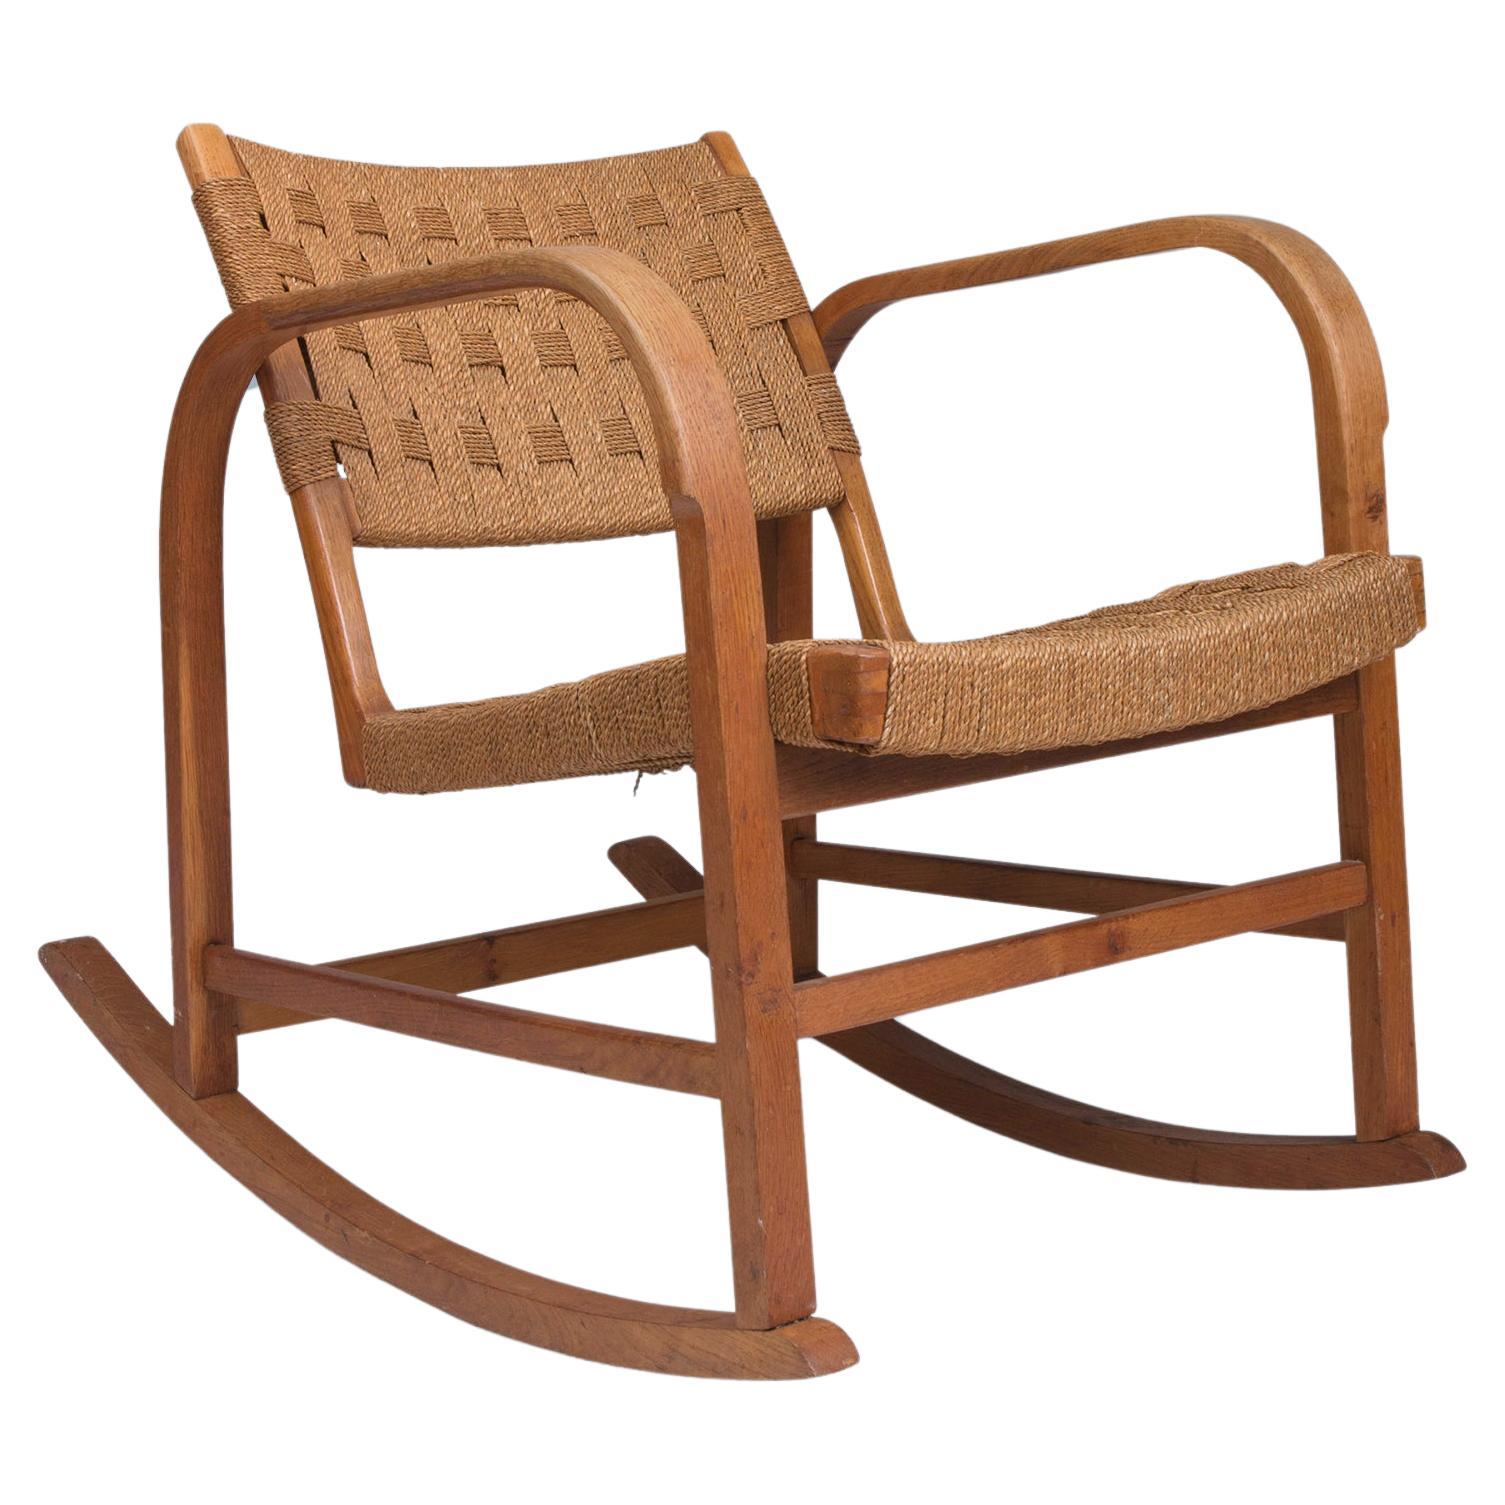 Danish modern oak rocking chair with curves and seagrass seat 